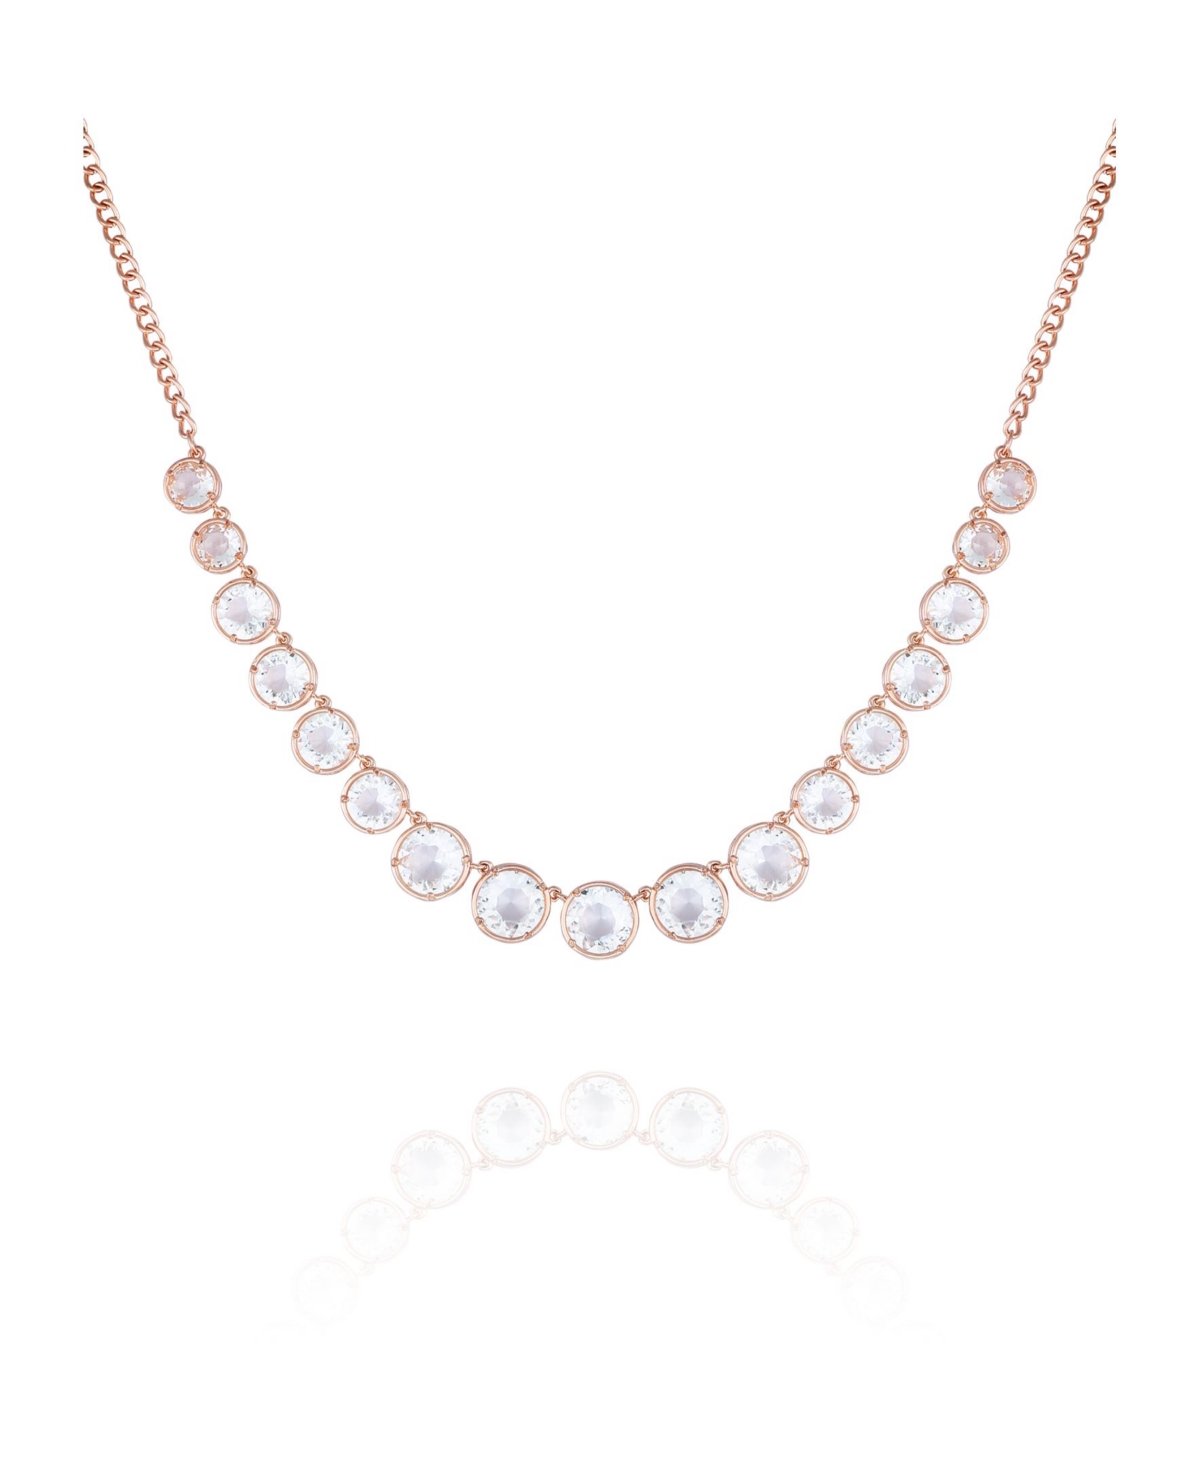 Women's Graduated Stone Necklace - Rose Gold